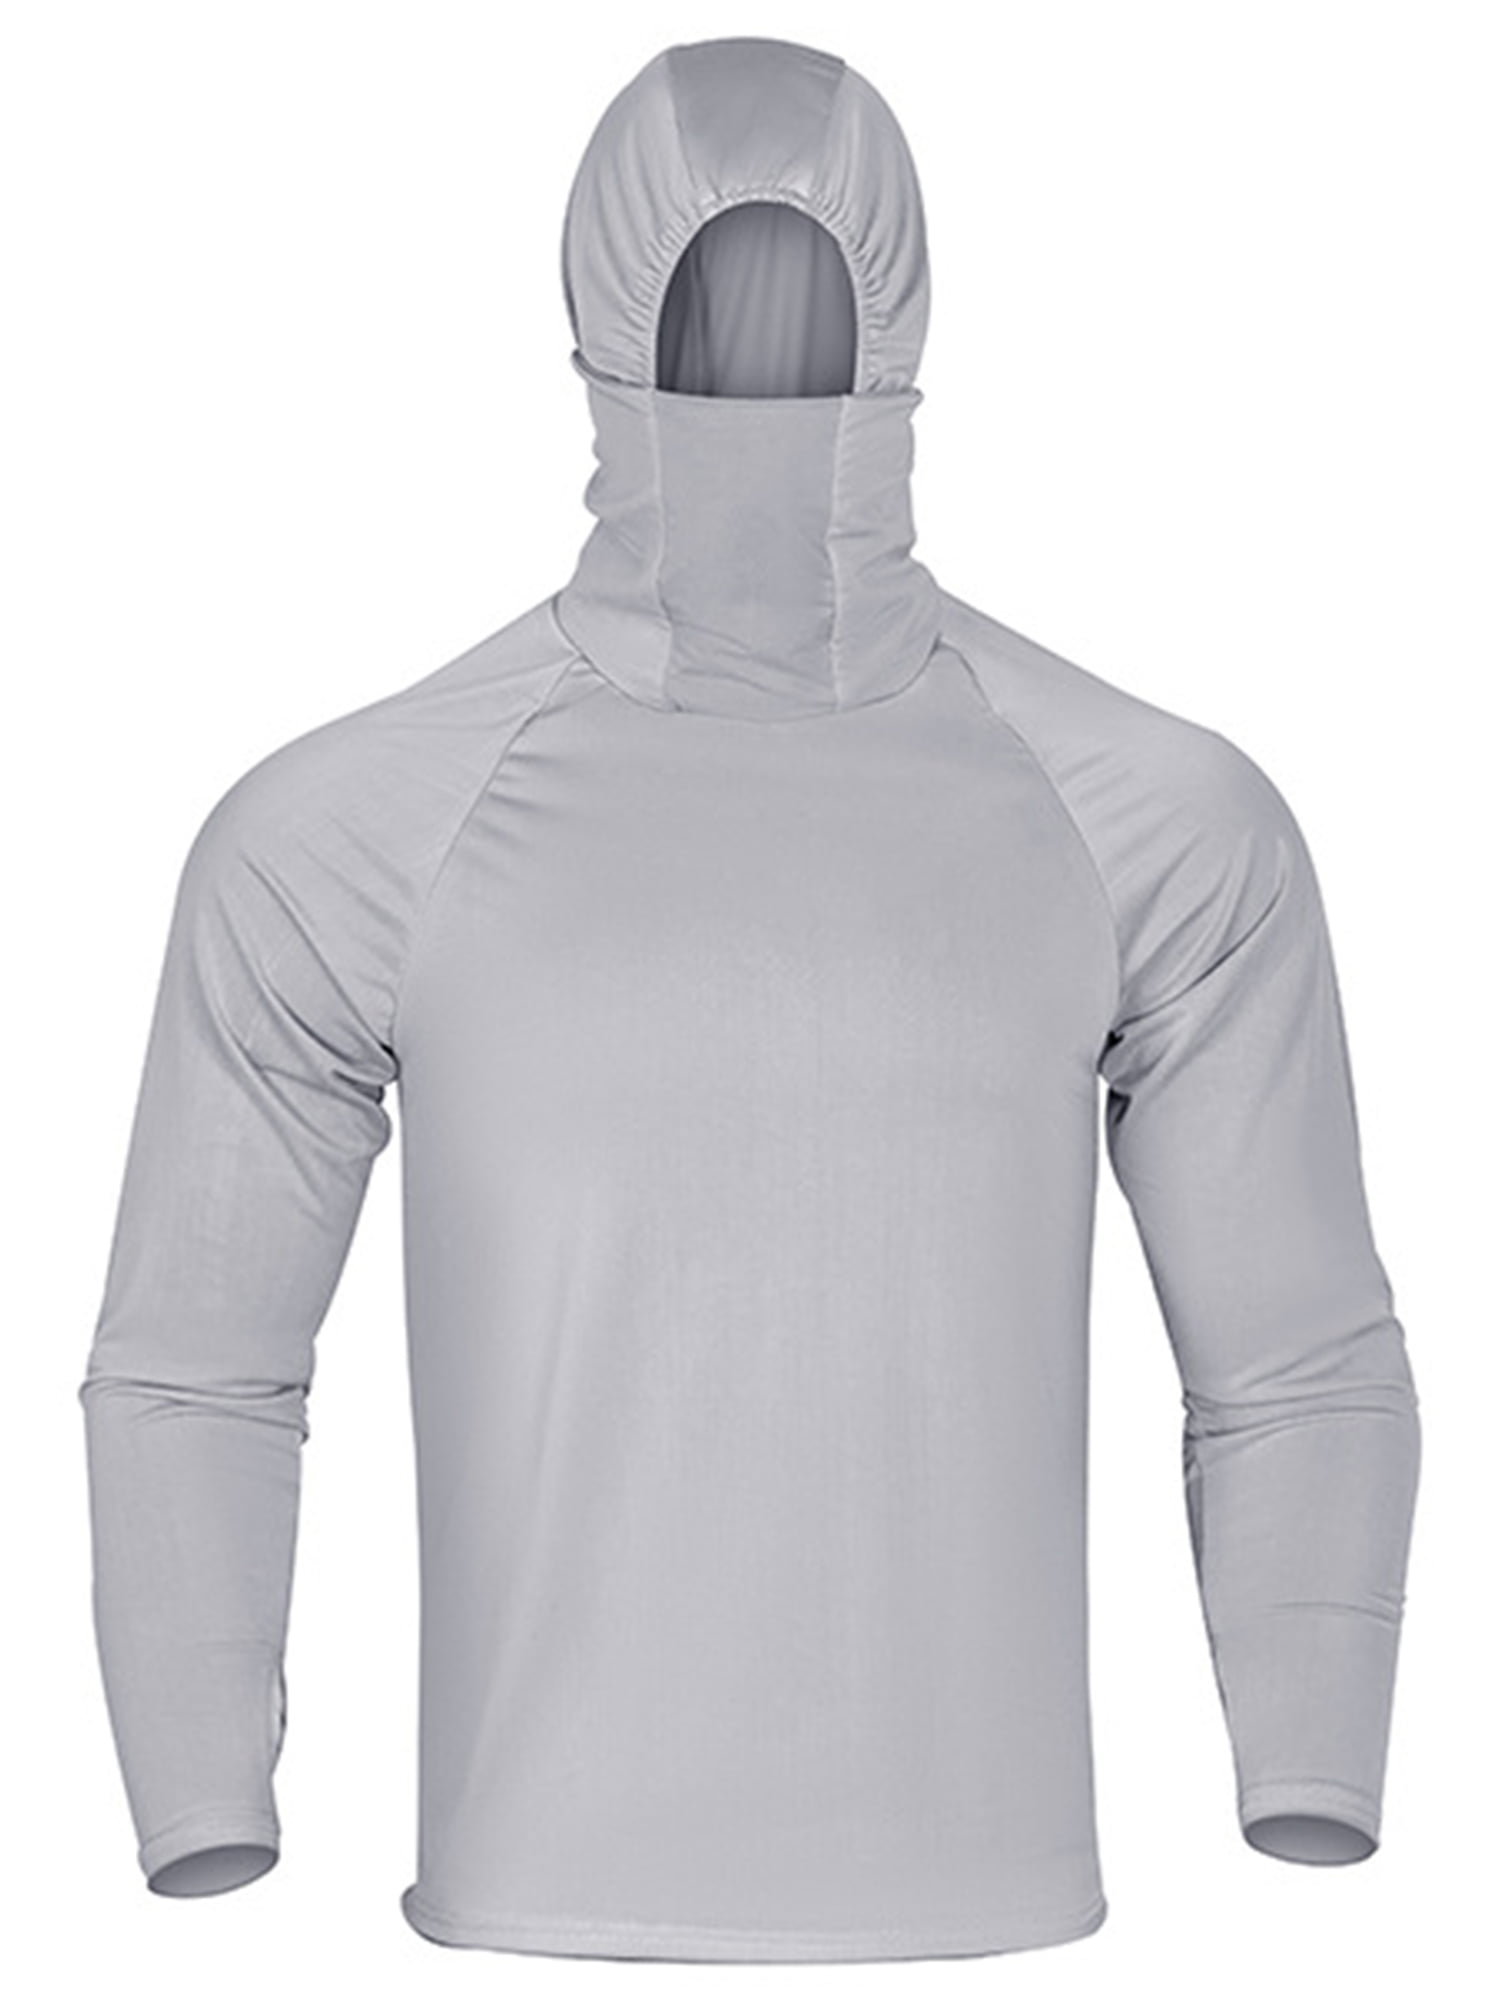 Niuer Breathable Fishing Shirts for Men UPF 50 with Gaiter Mask Sun  Protection T-Shirt Summer Quick Dry Long Sleeve Fishing Hoodies Tops 